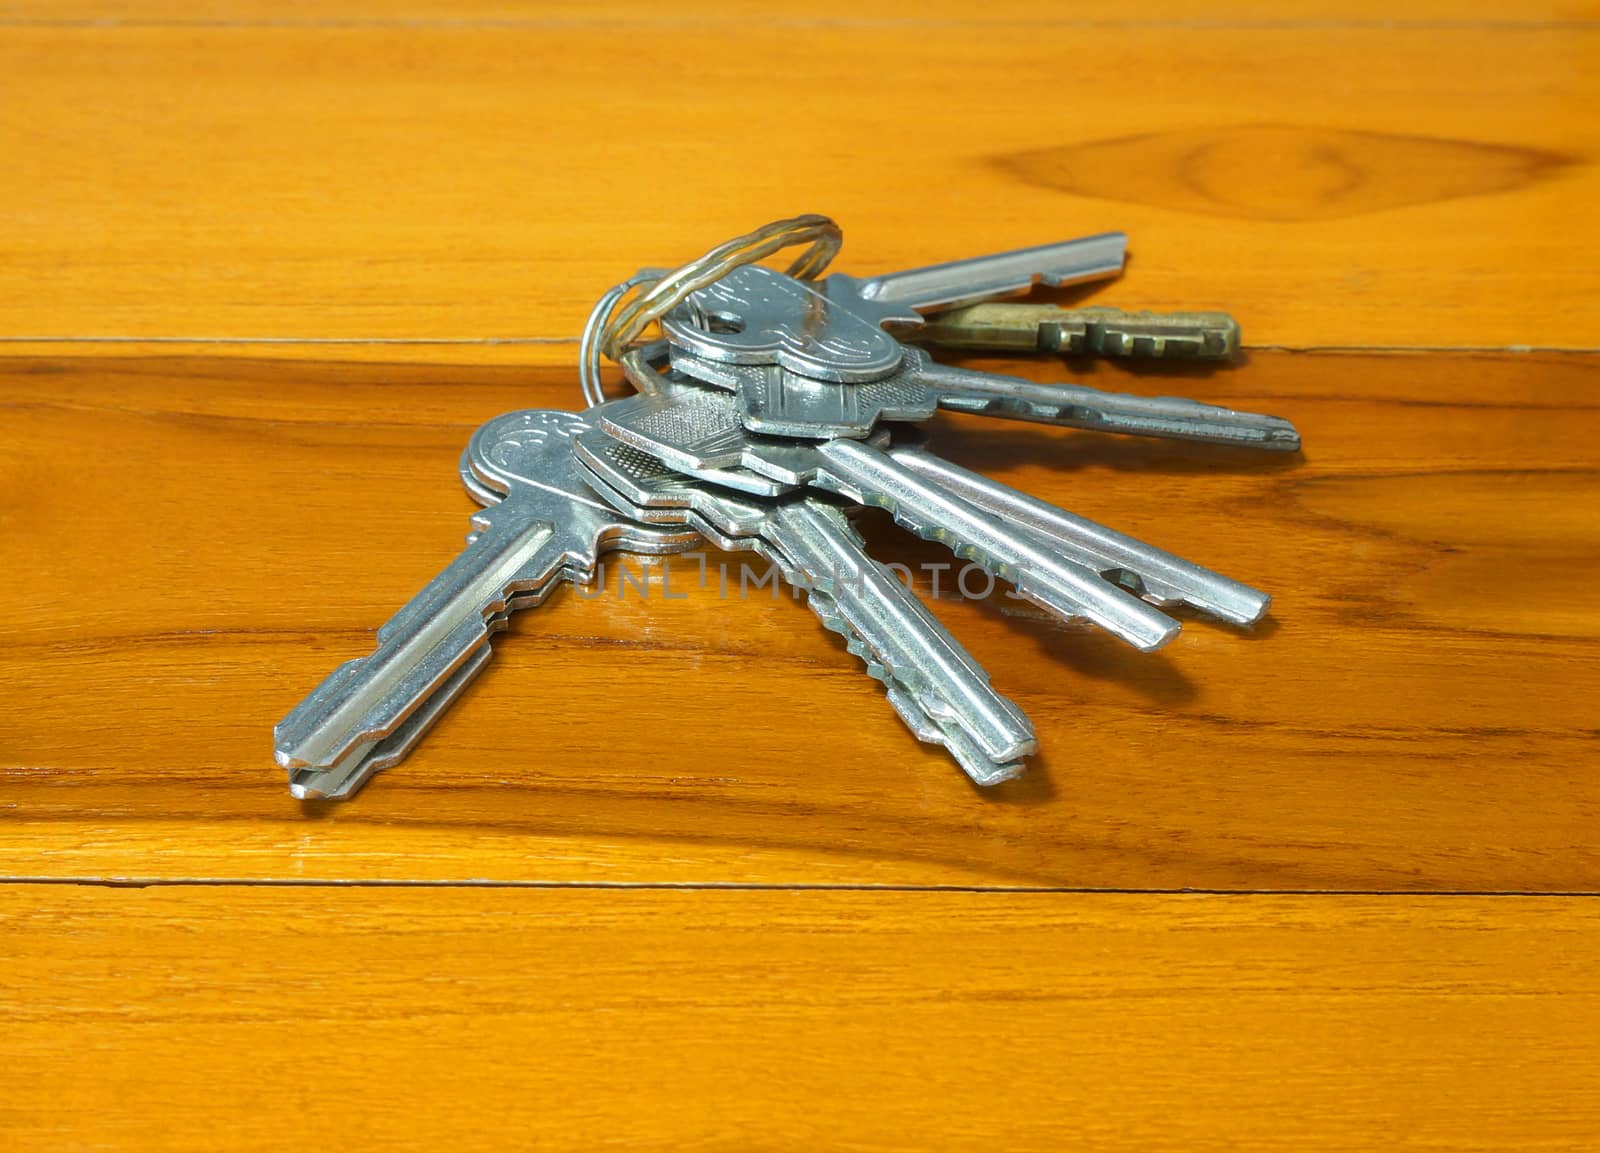 Several key inserted in the same bunch placed on a wooden table.                             